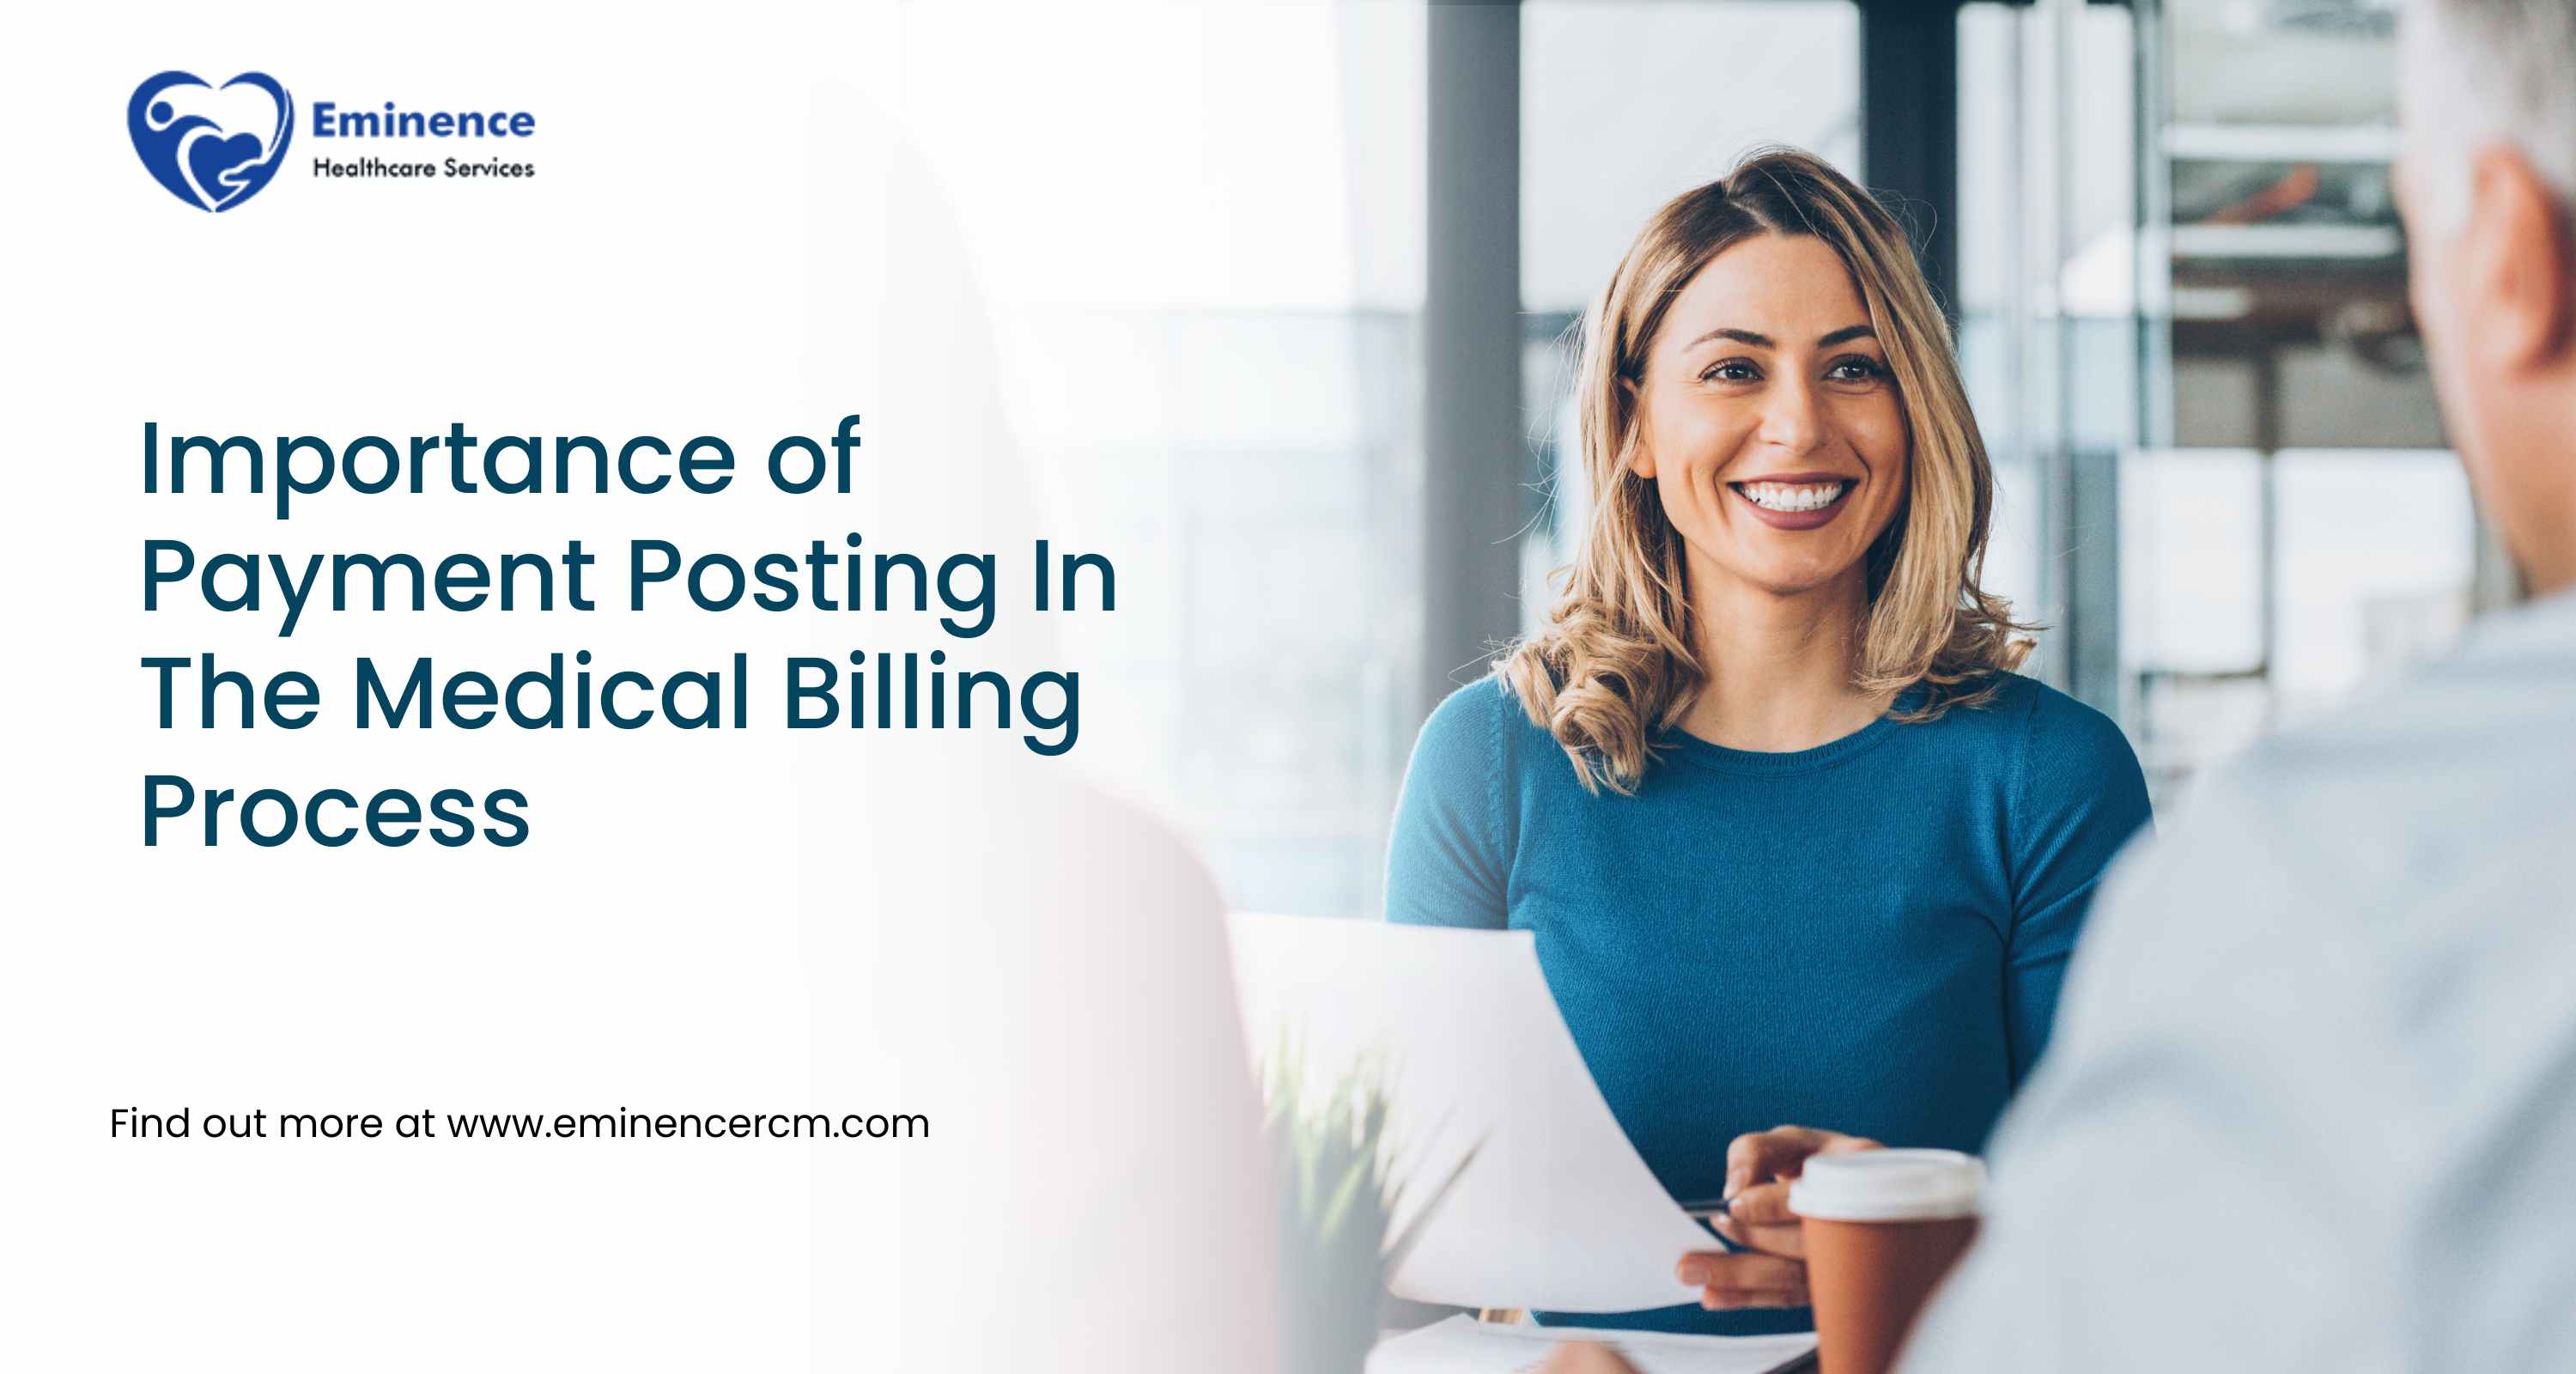 Payment Posting is Essential in Medical Billing